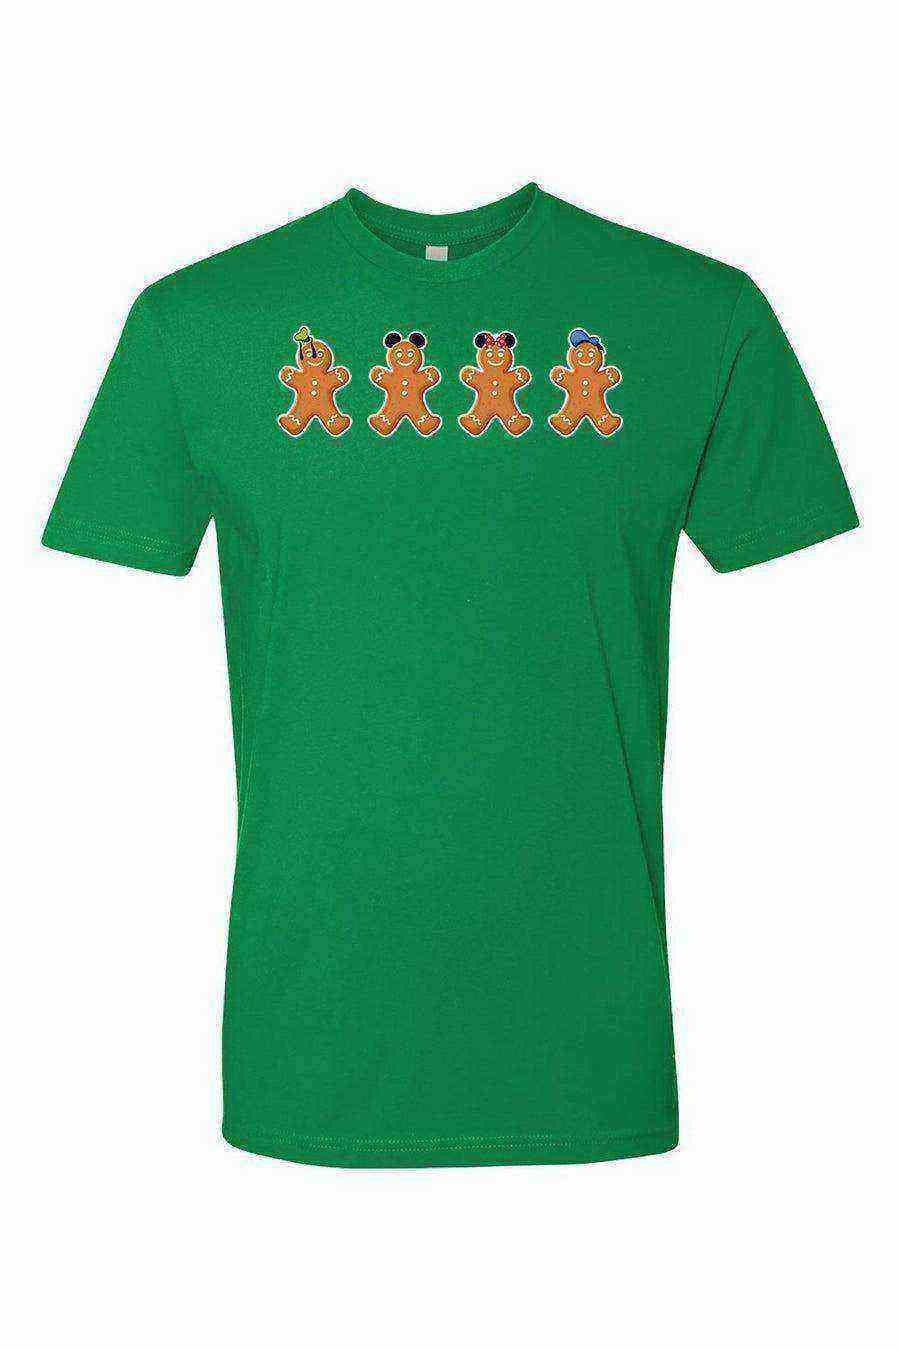 Toddler | Gingerbread Characters Tee - Dylan's Tees